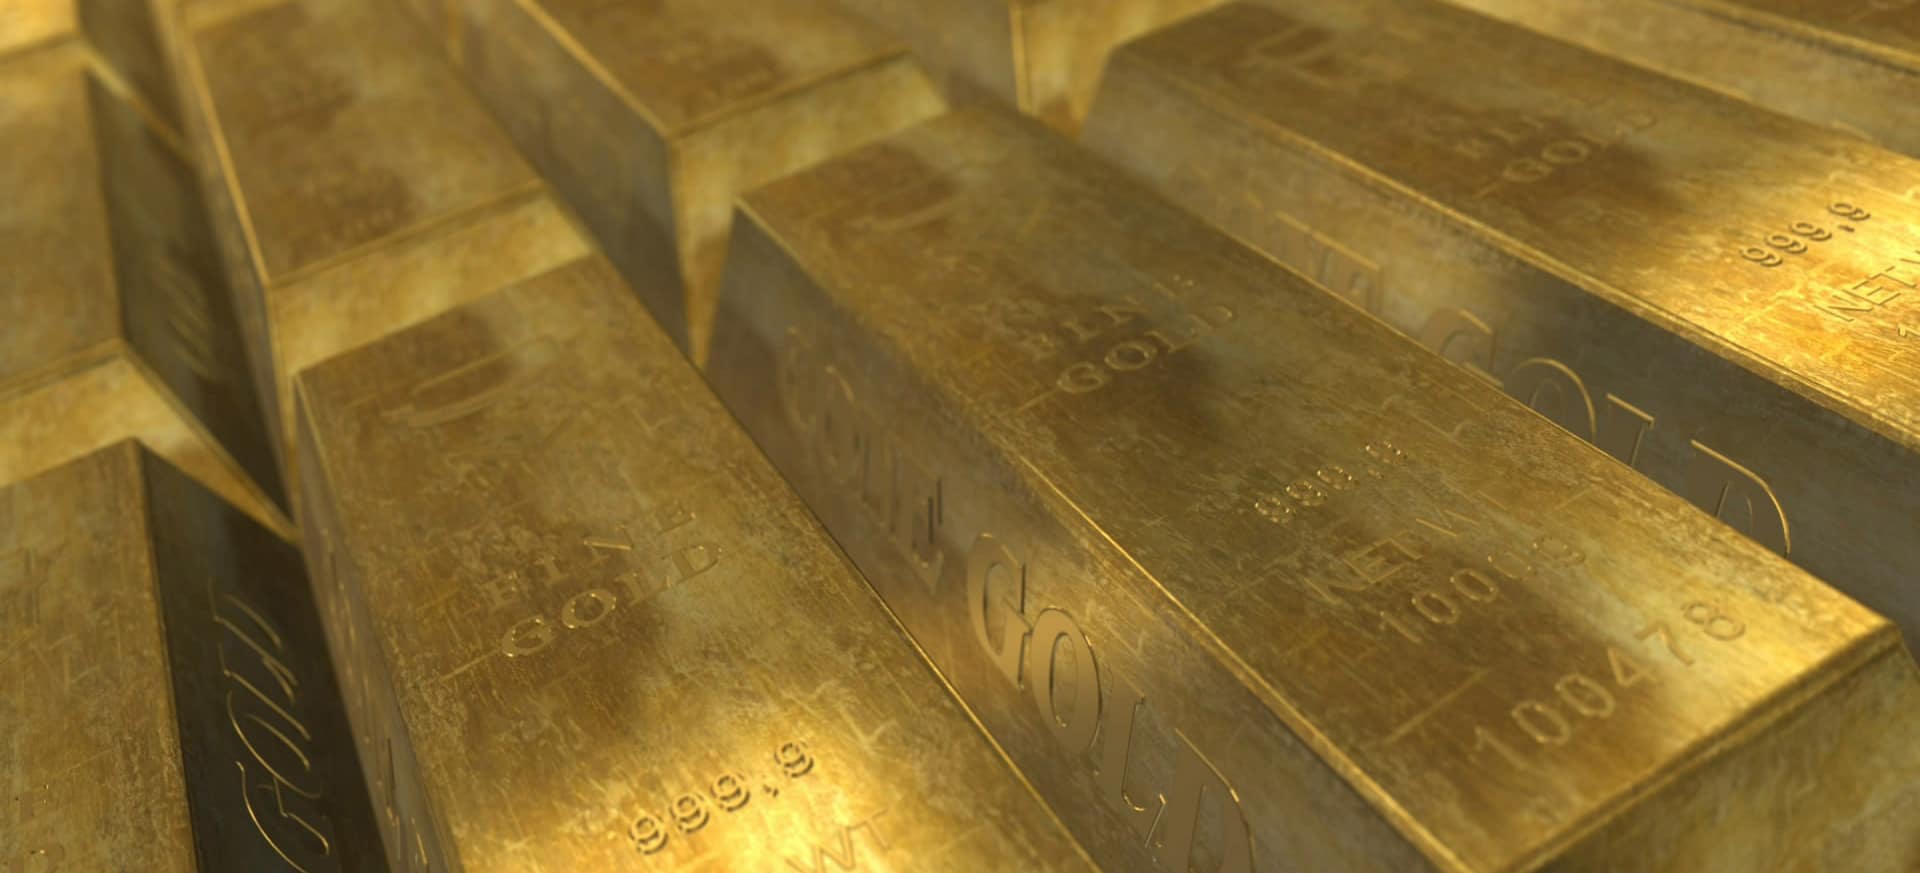 Overstock Accumulating Gold (and Food) for Next Financial Crisis